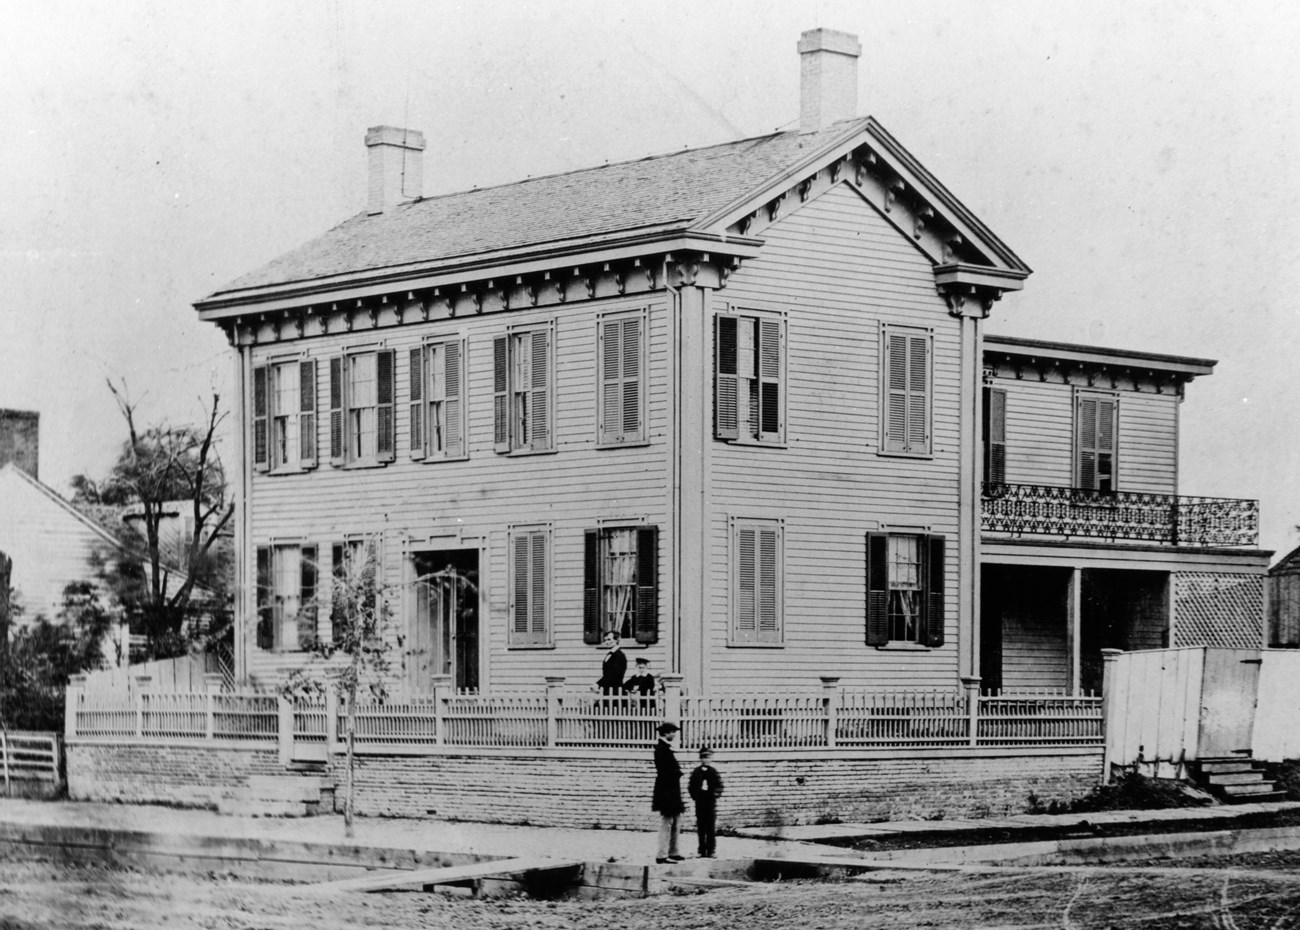 Black and white photo of the Lincoln Home, a 2 story wooden house on a brick retaining wall with a fence. Abraham Lincoln and his son stand behind front yard fence.